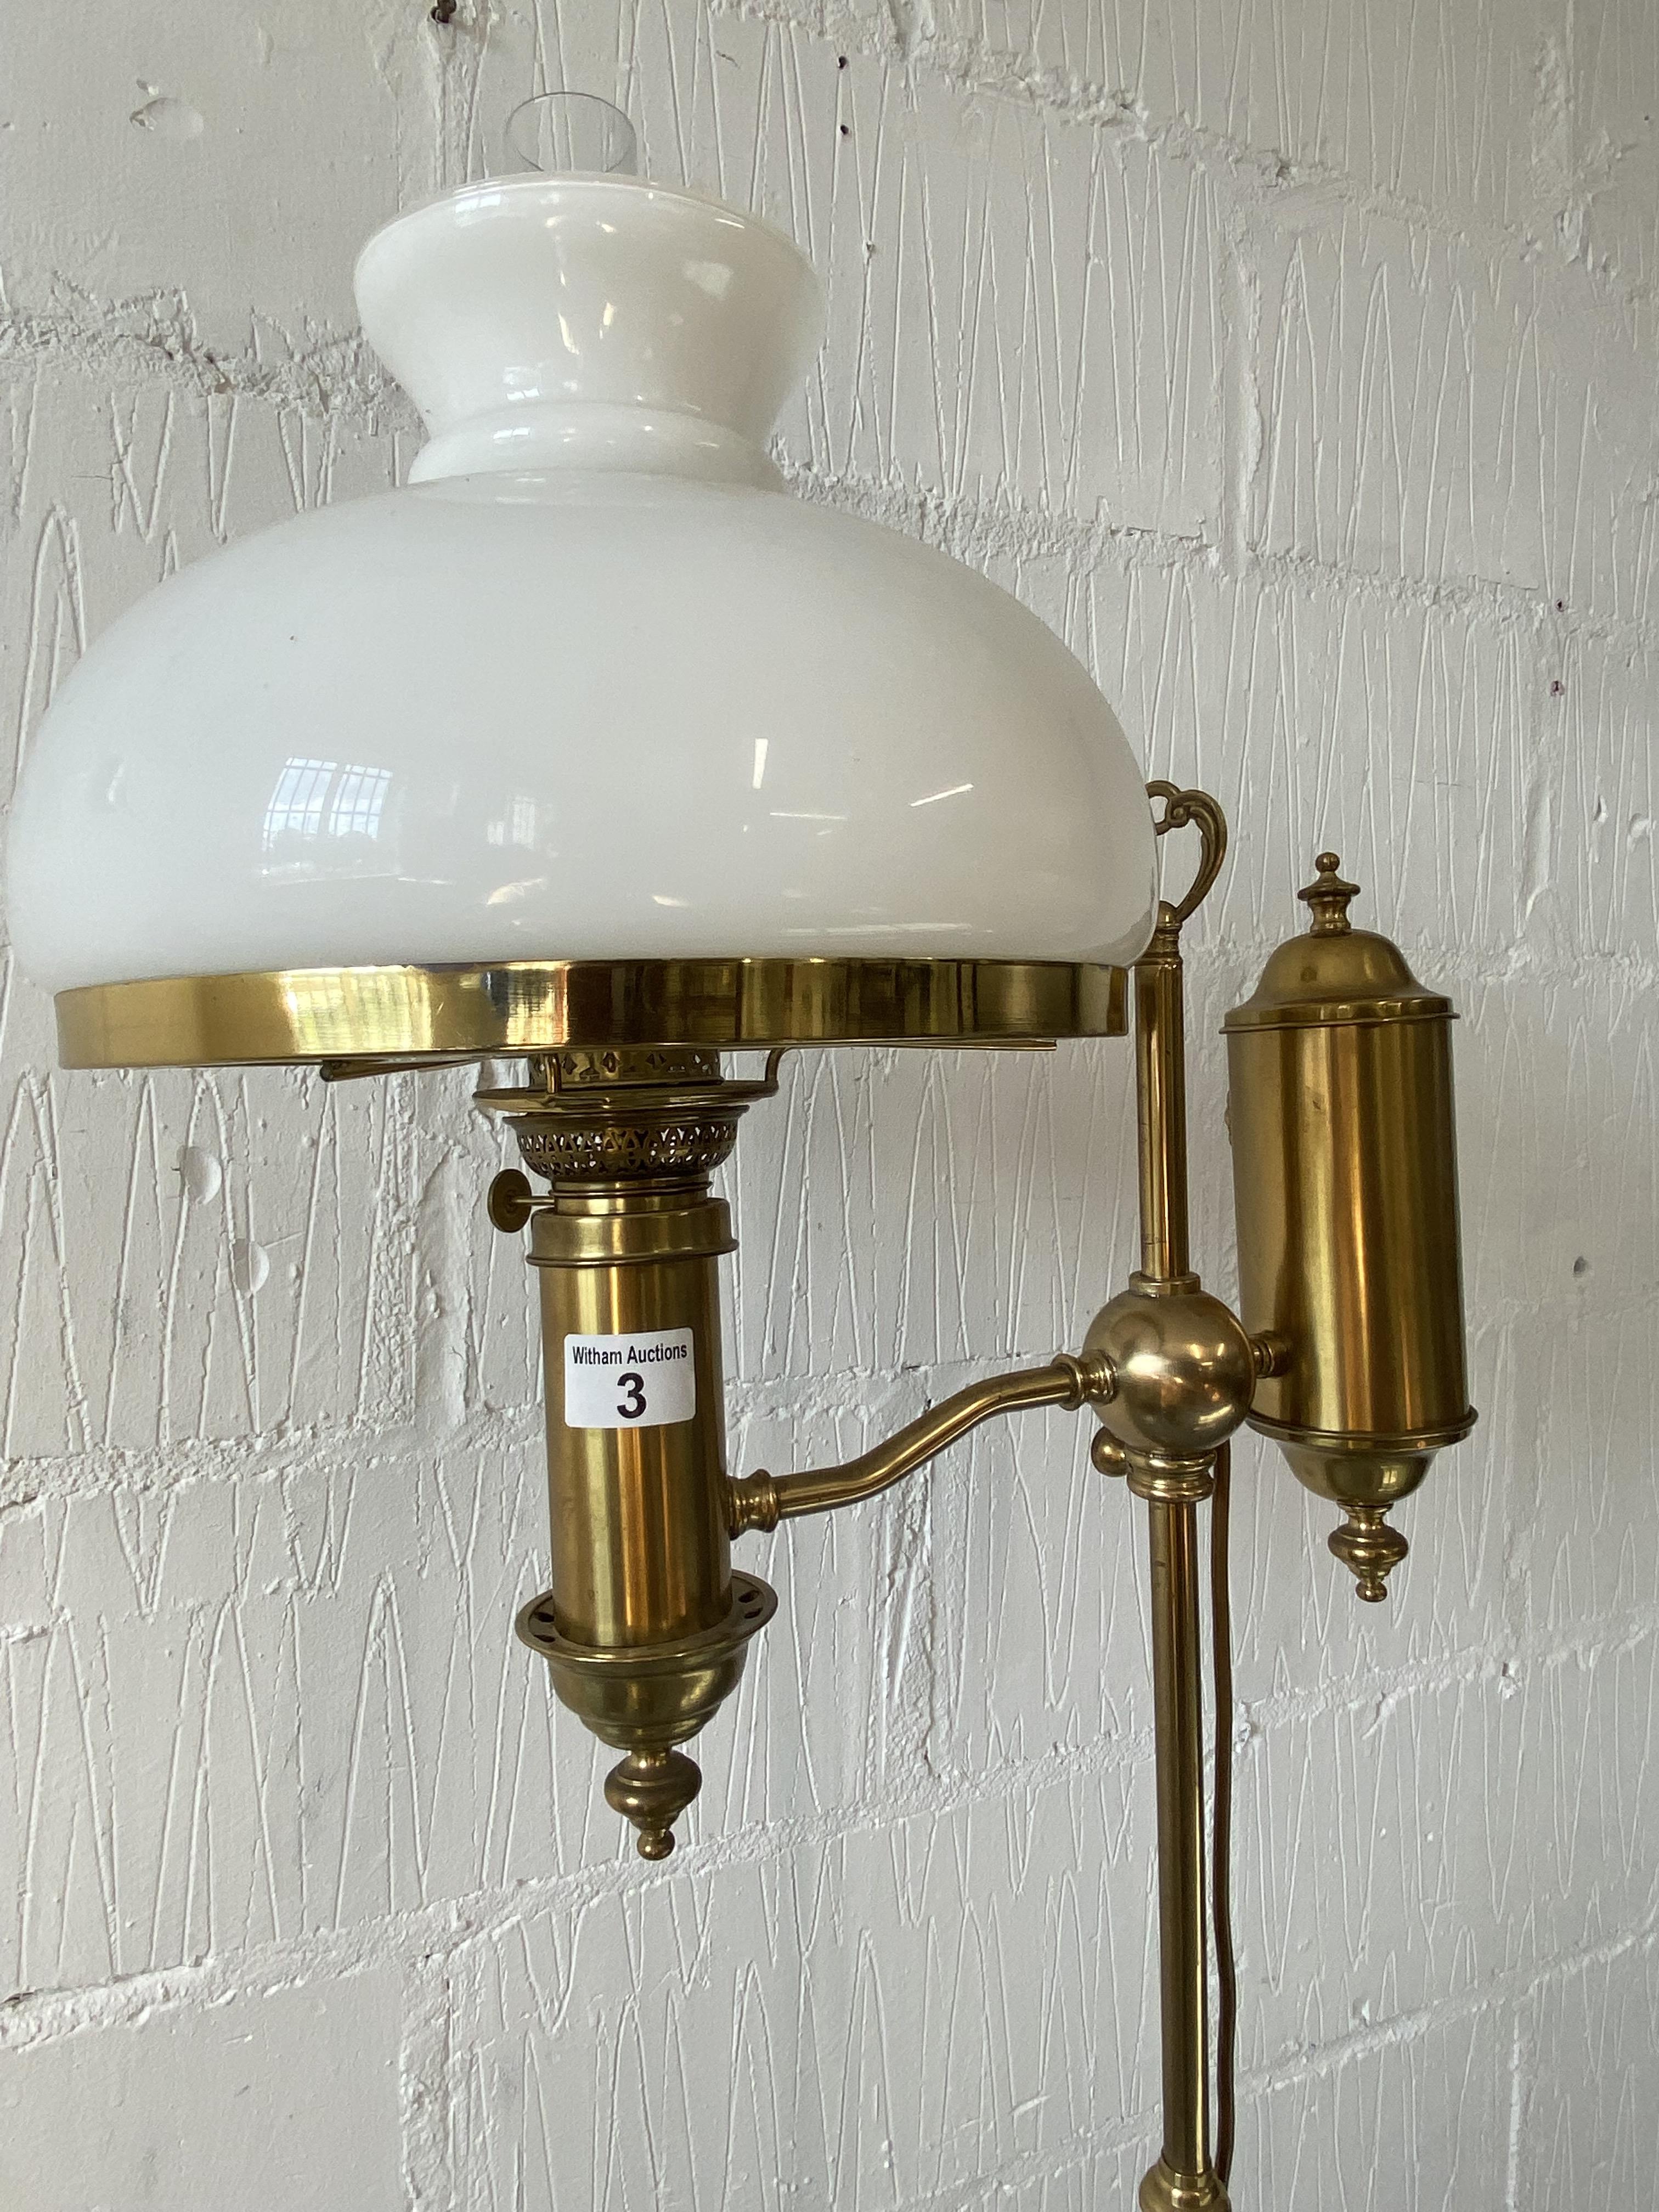 Standard brass floor lamp converted to electric, with glass funnel and glass shade - Image 2 of 2